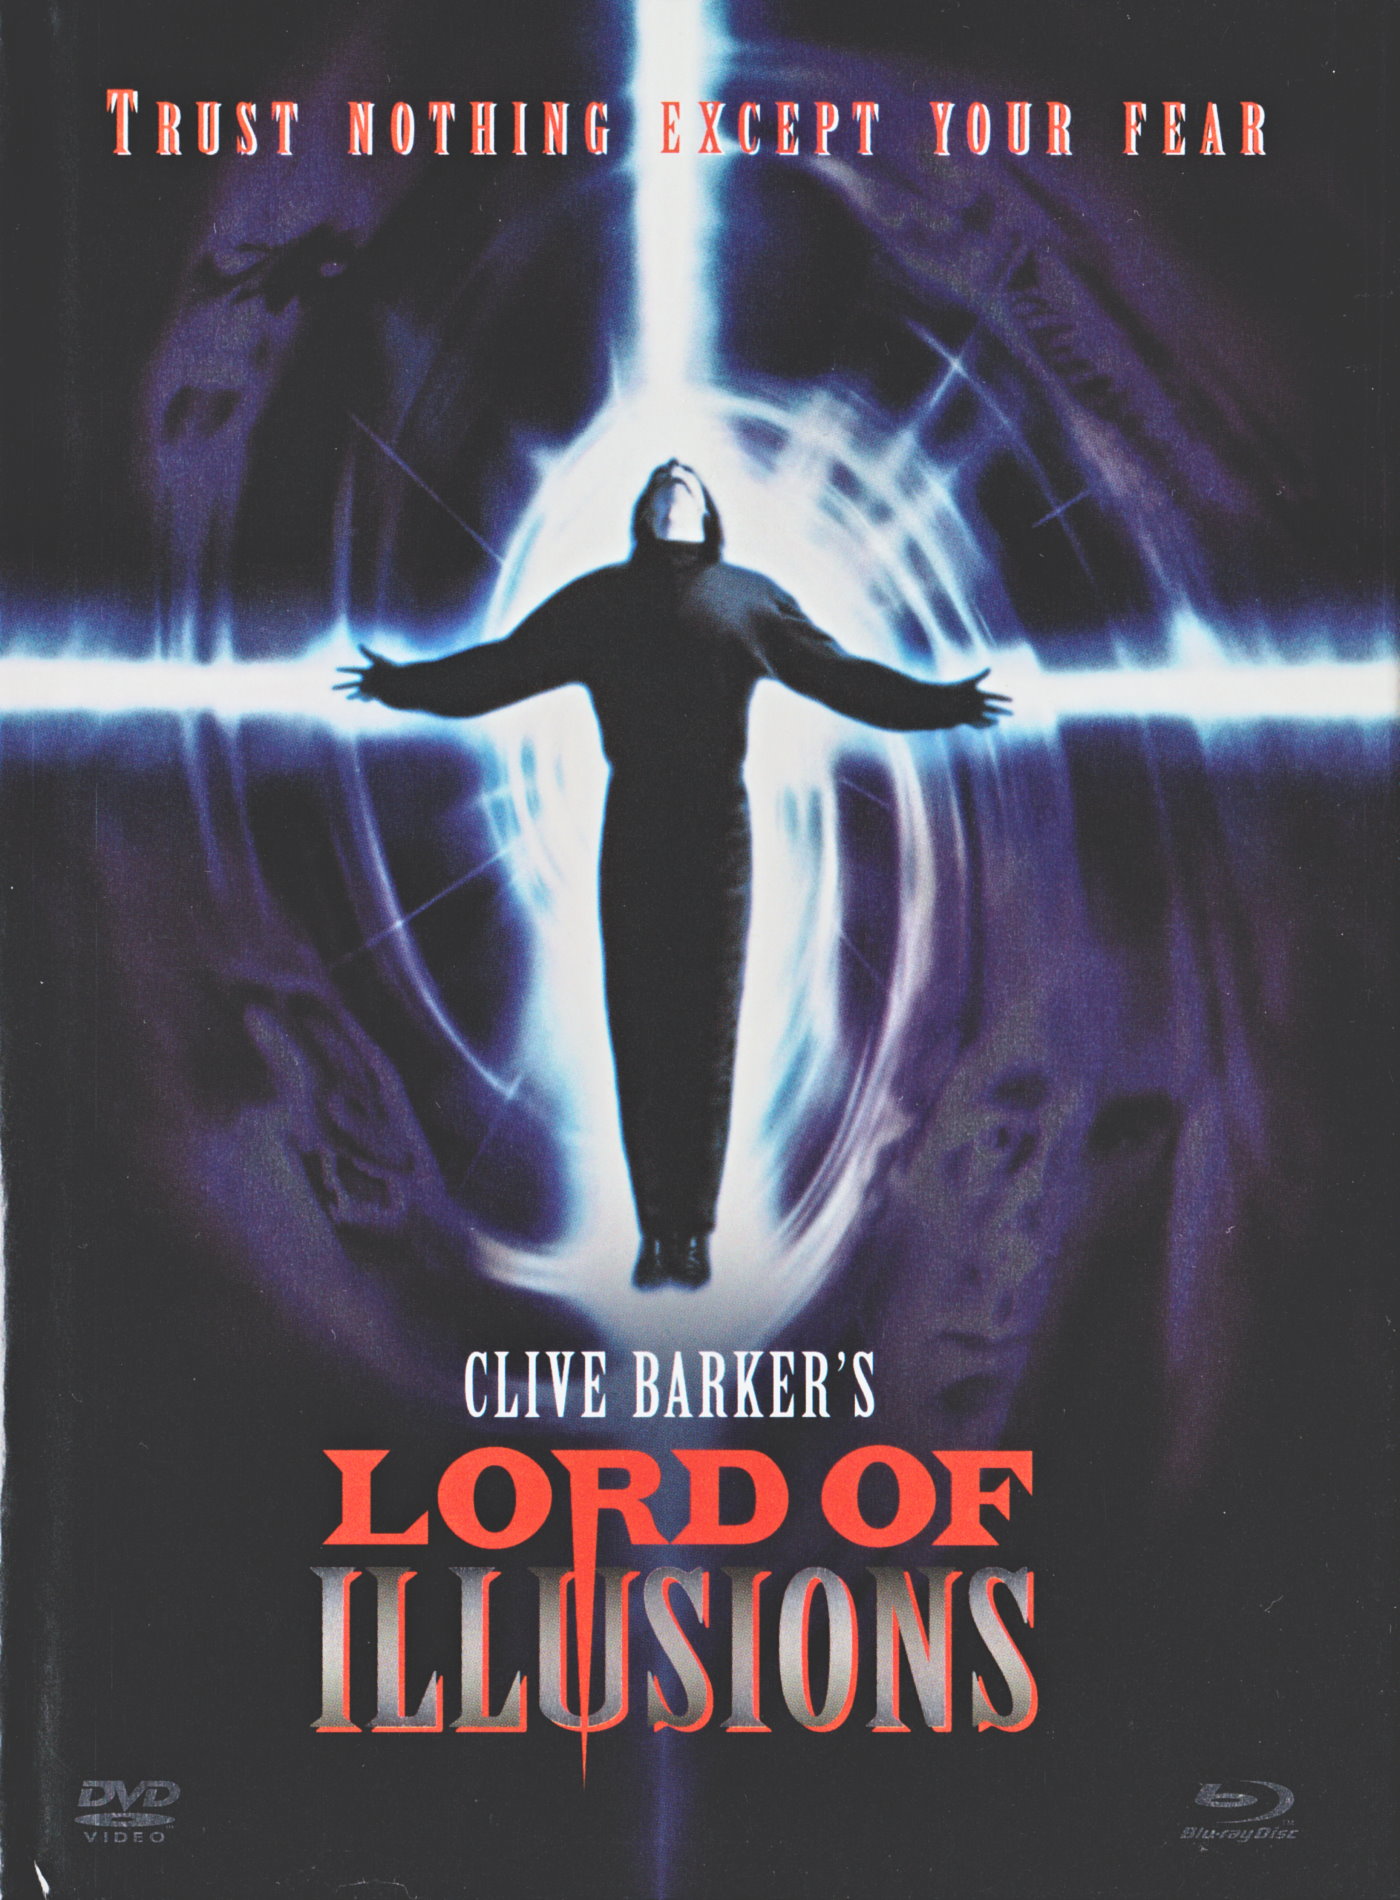 Cover - Lord of Illusions.jpg